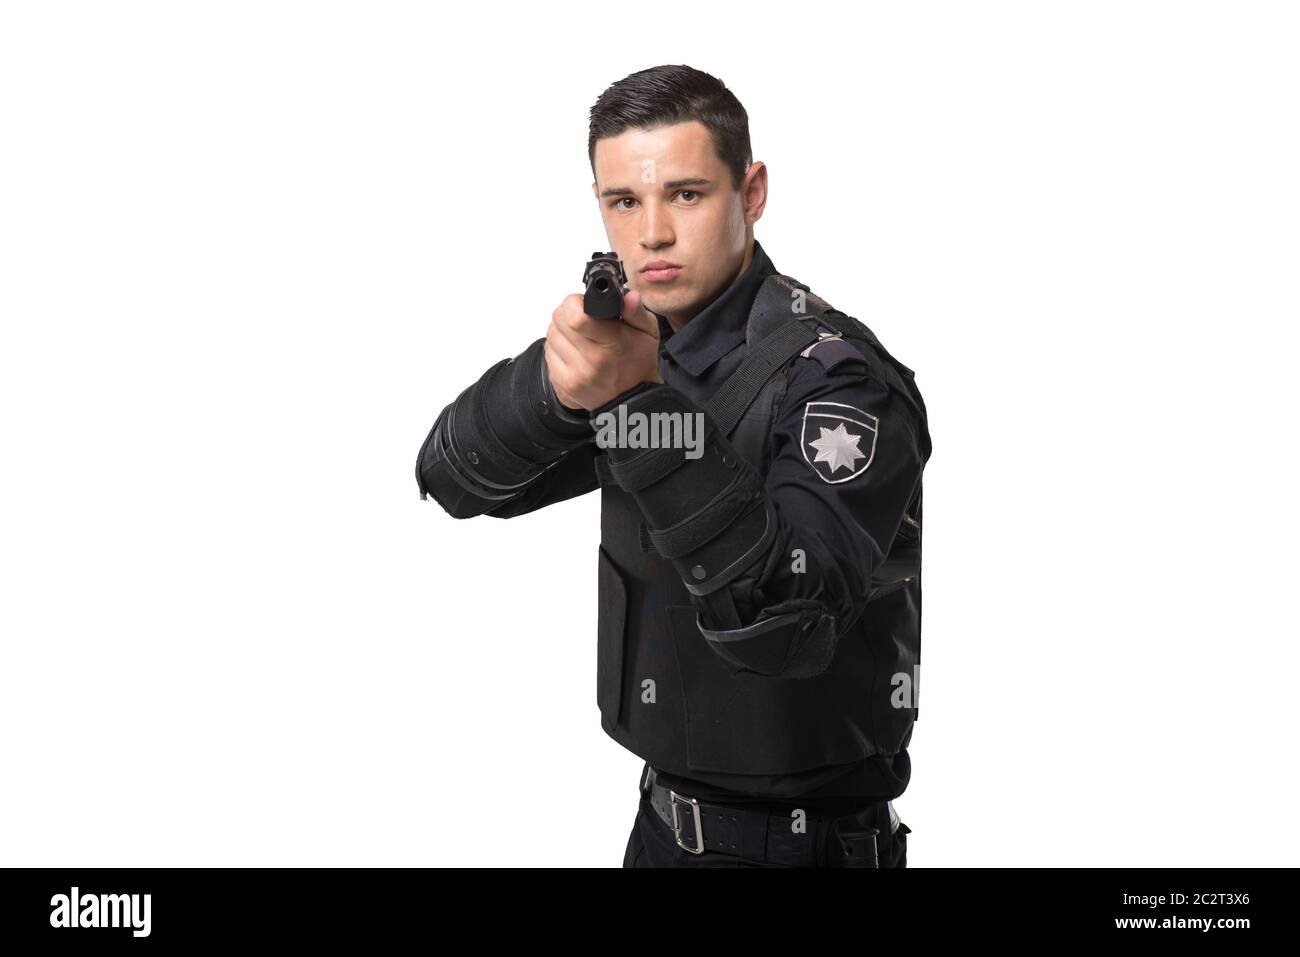 Armed police officer aims with a gun, black uniform with body armor, white background, front view. Policeman in special ammunition Stock Photo